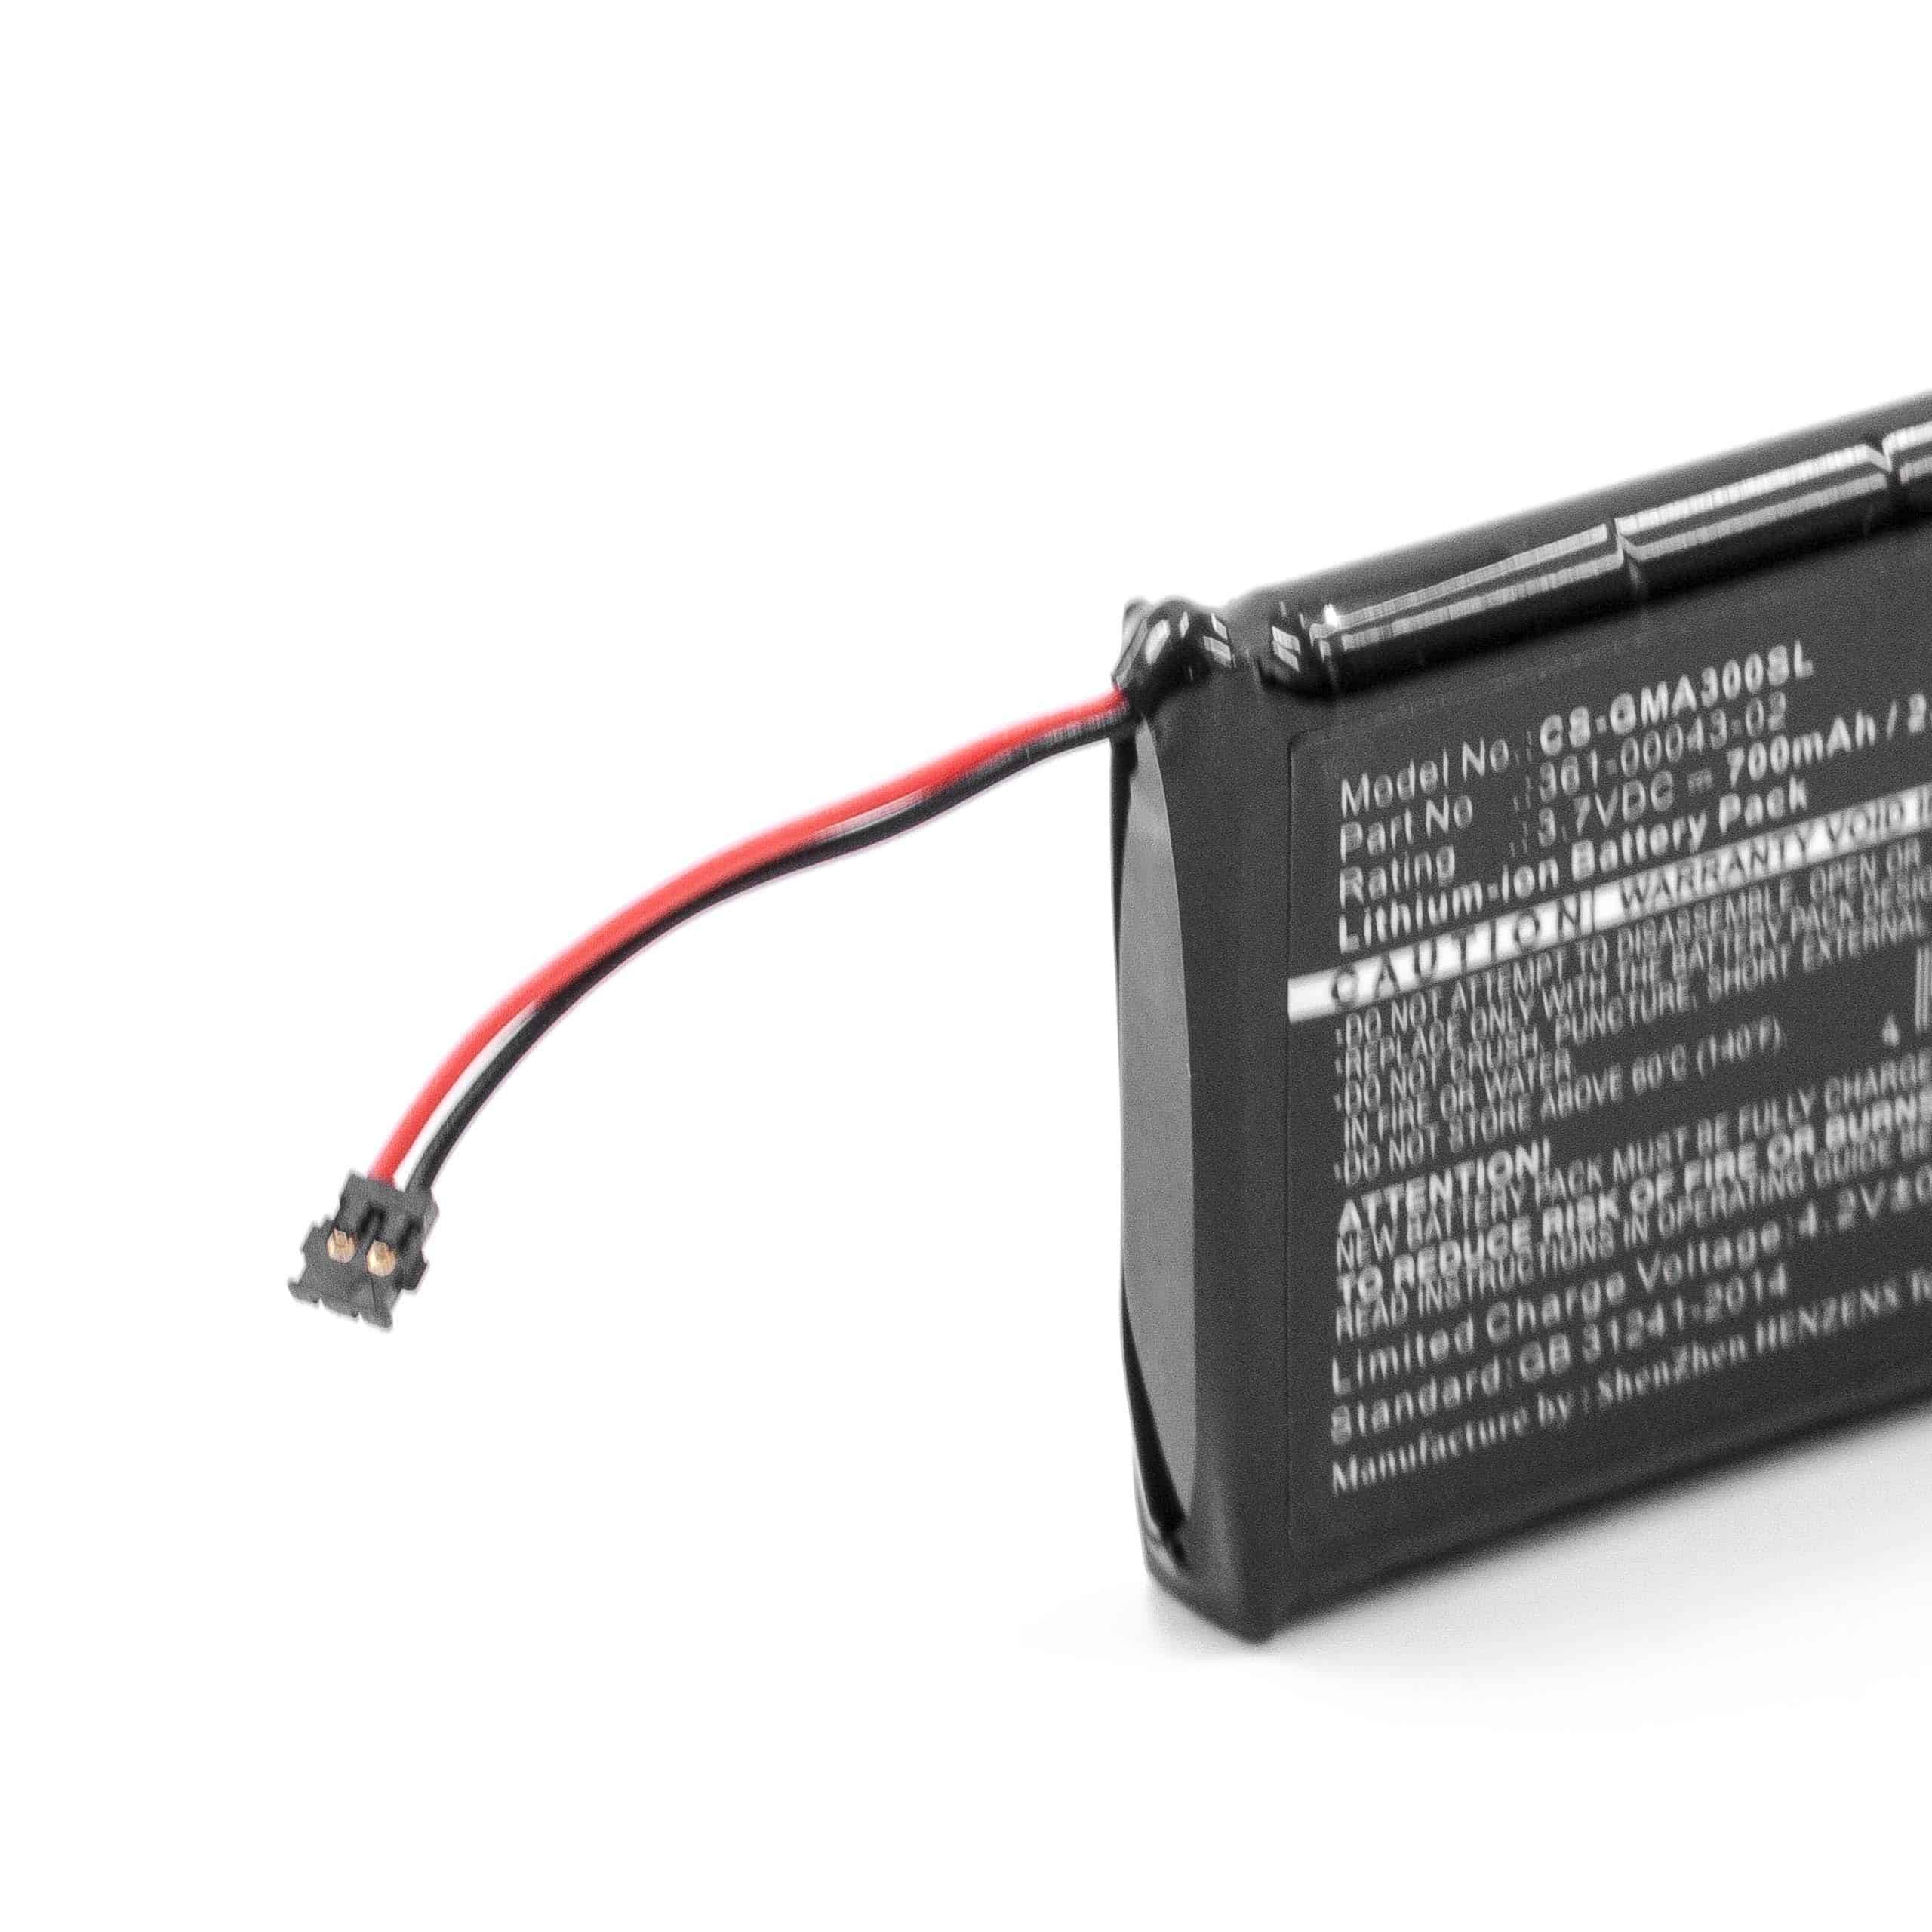 GPS Battery Replacement for Garmin 361-00043-02 - 700mAh, 3.7V